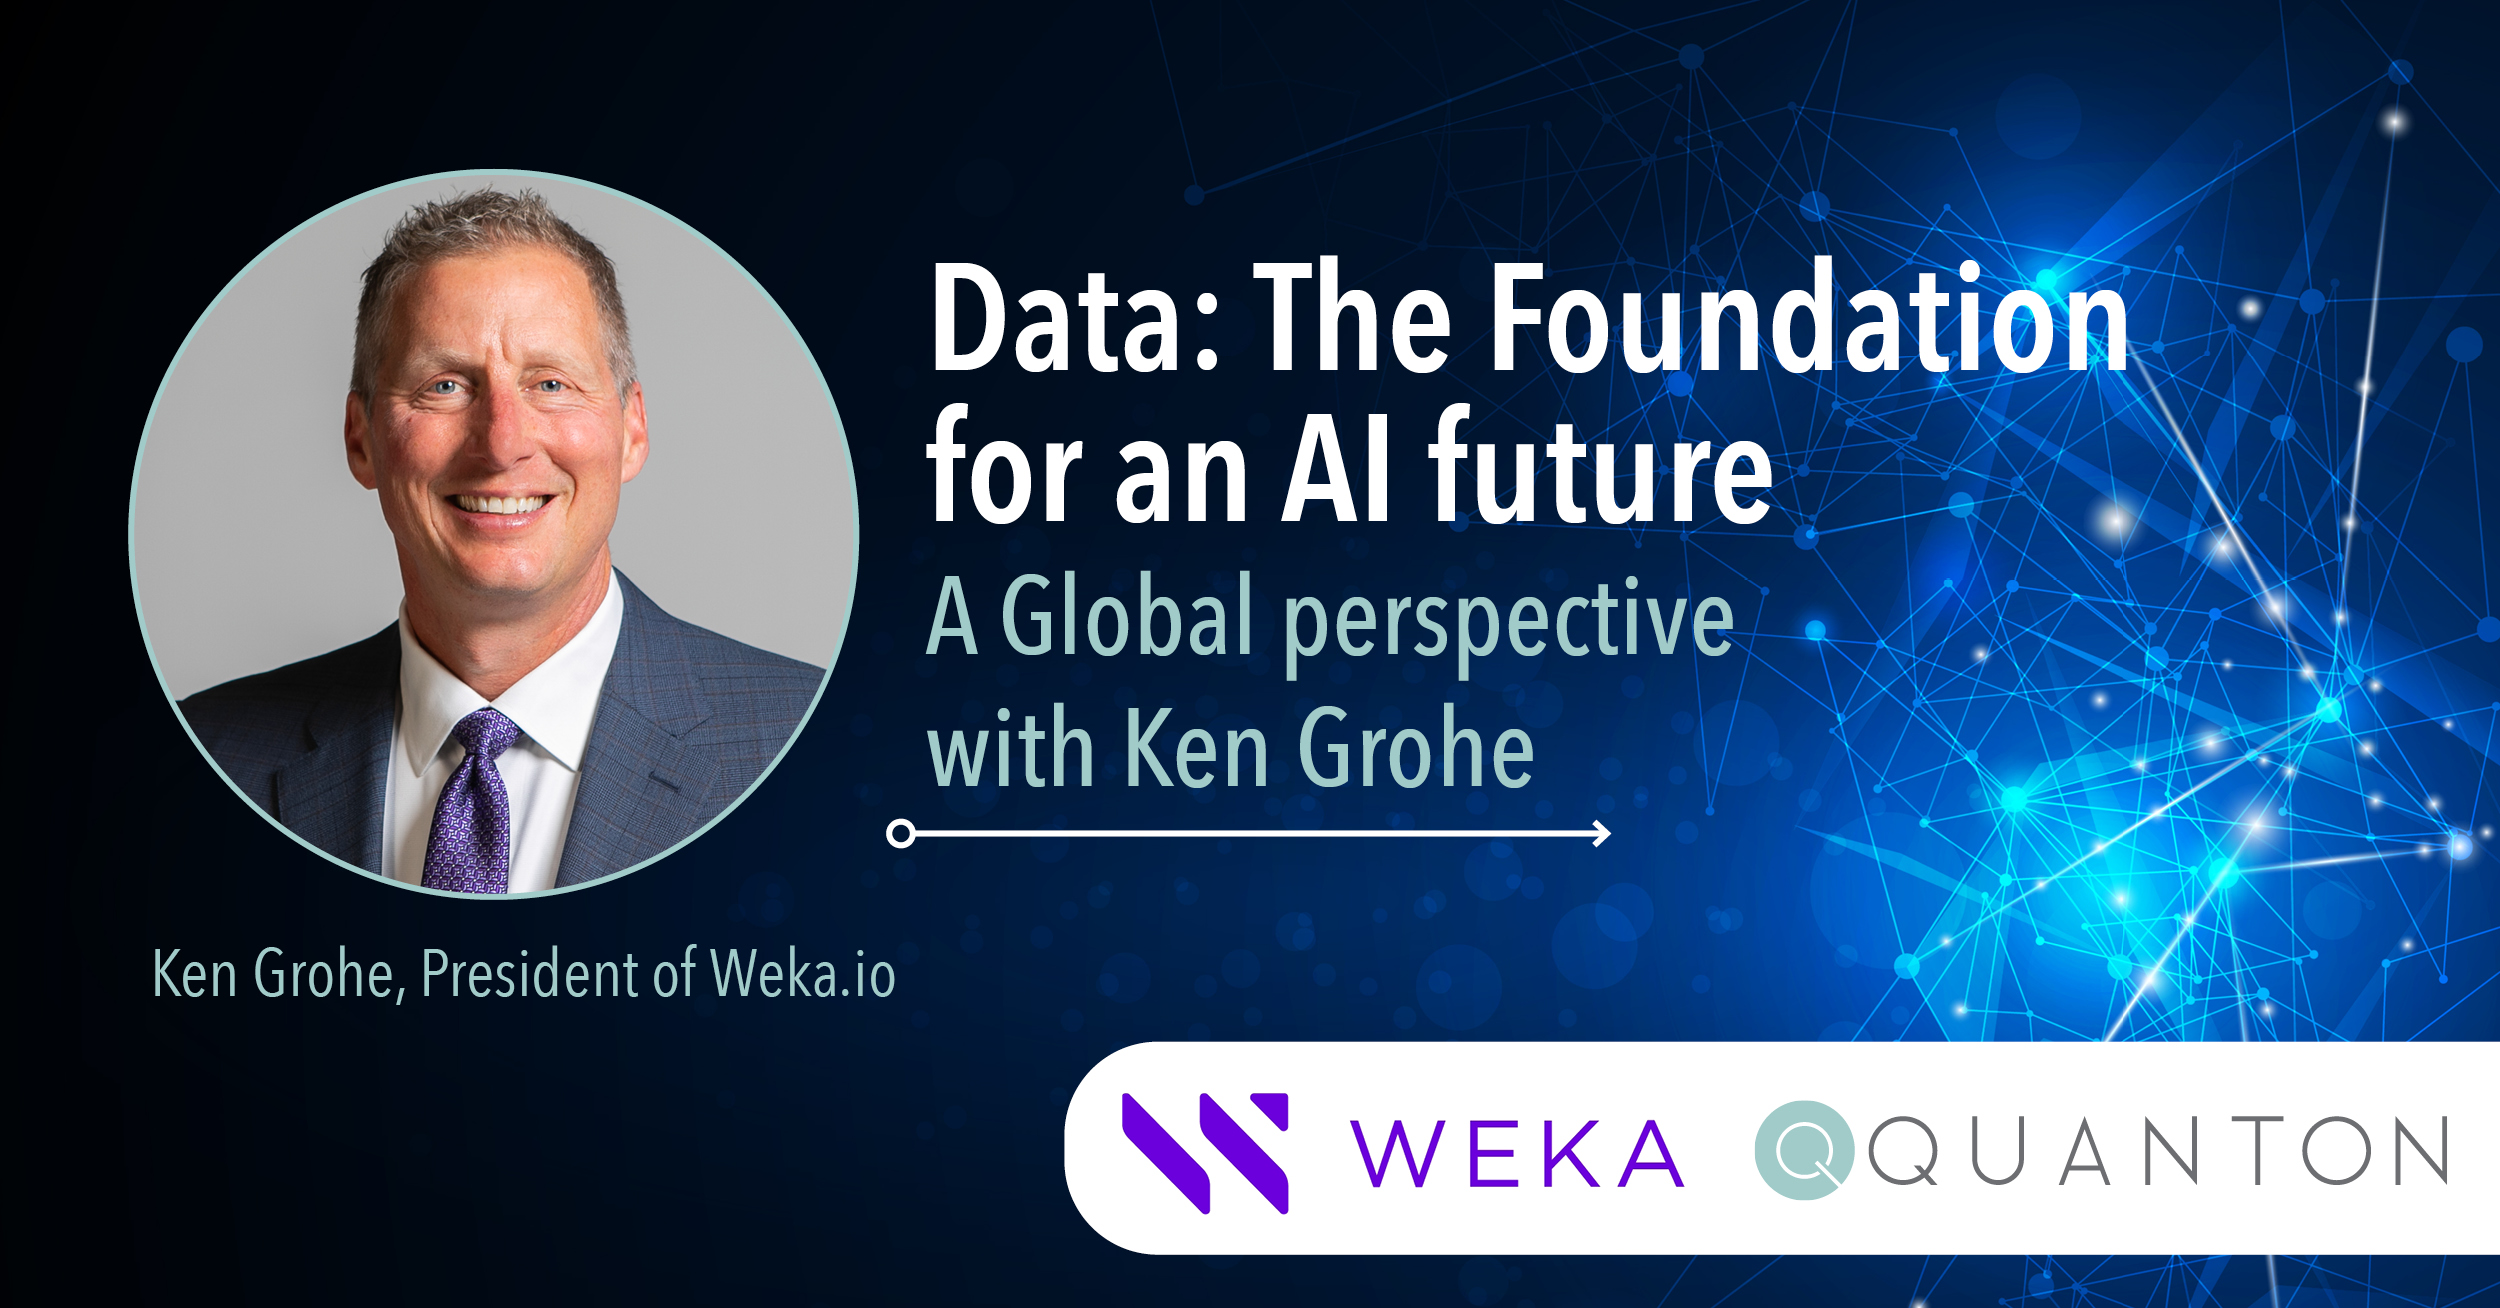 Ken Grohe Interview - Data: The Foundation for an AI Future